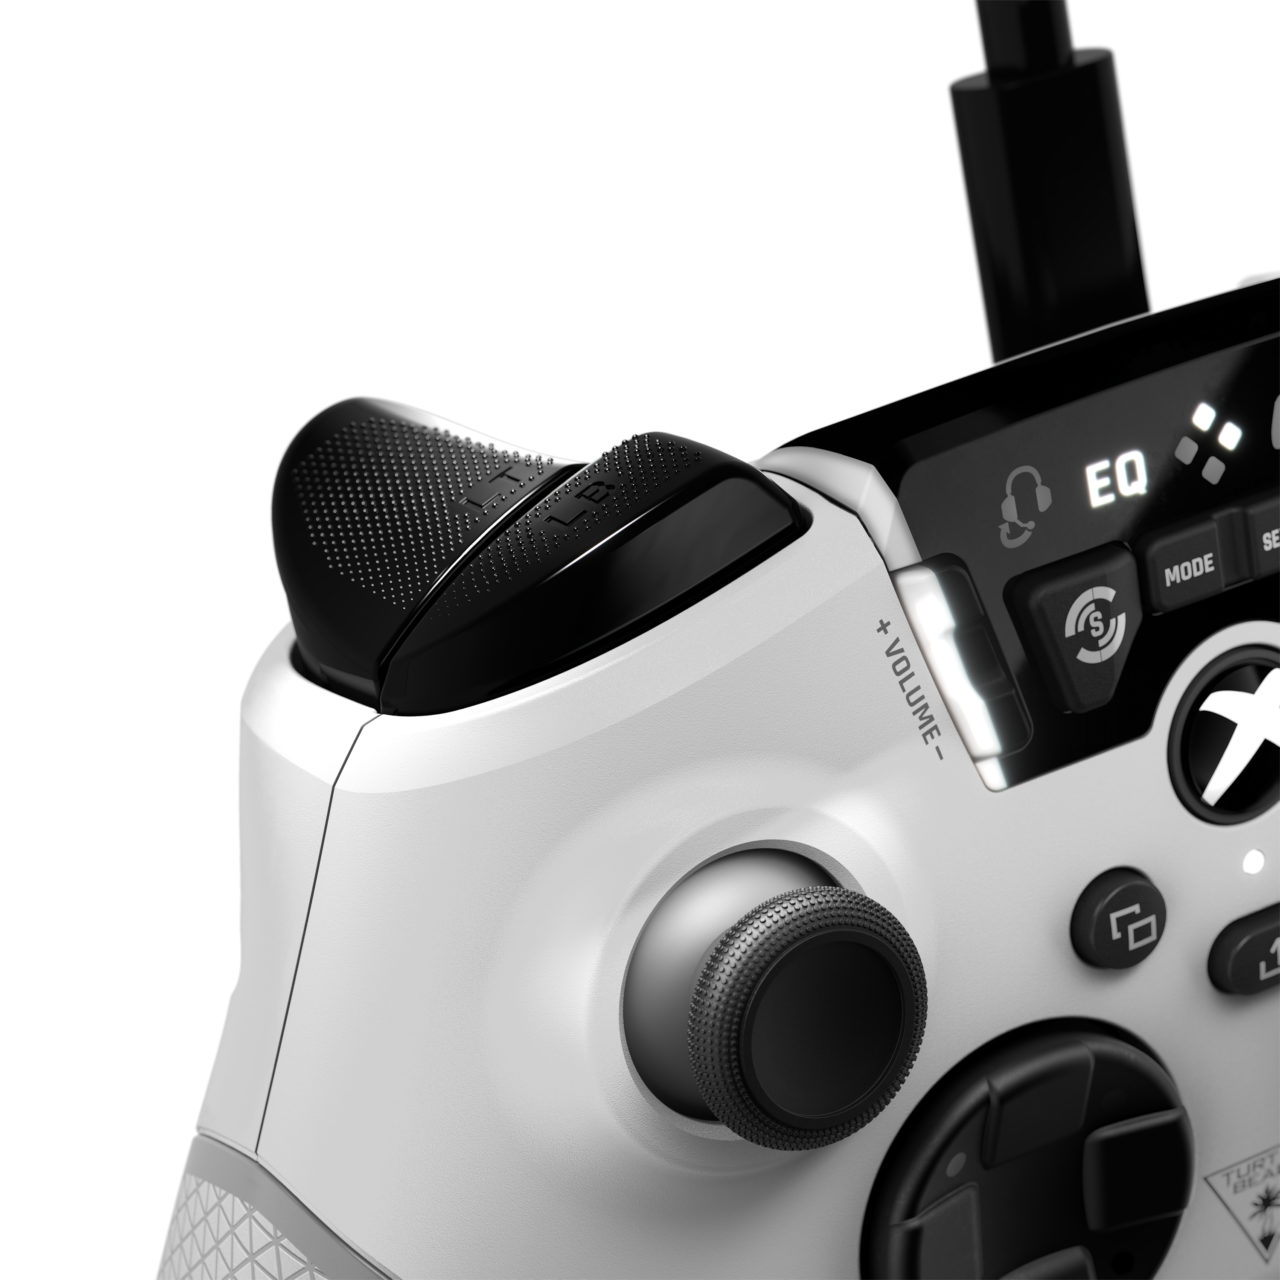 Recon Controller Designed For Xbox Product Image (Turtle Beach)